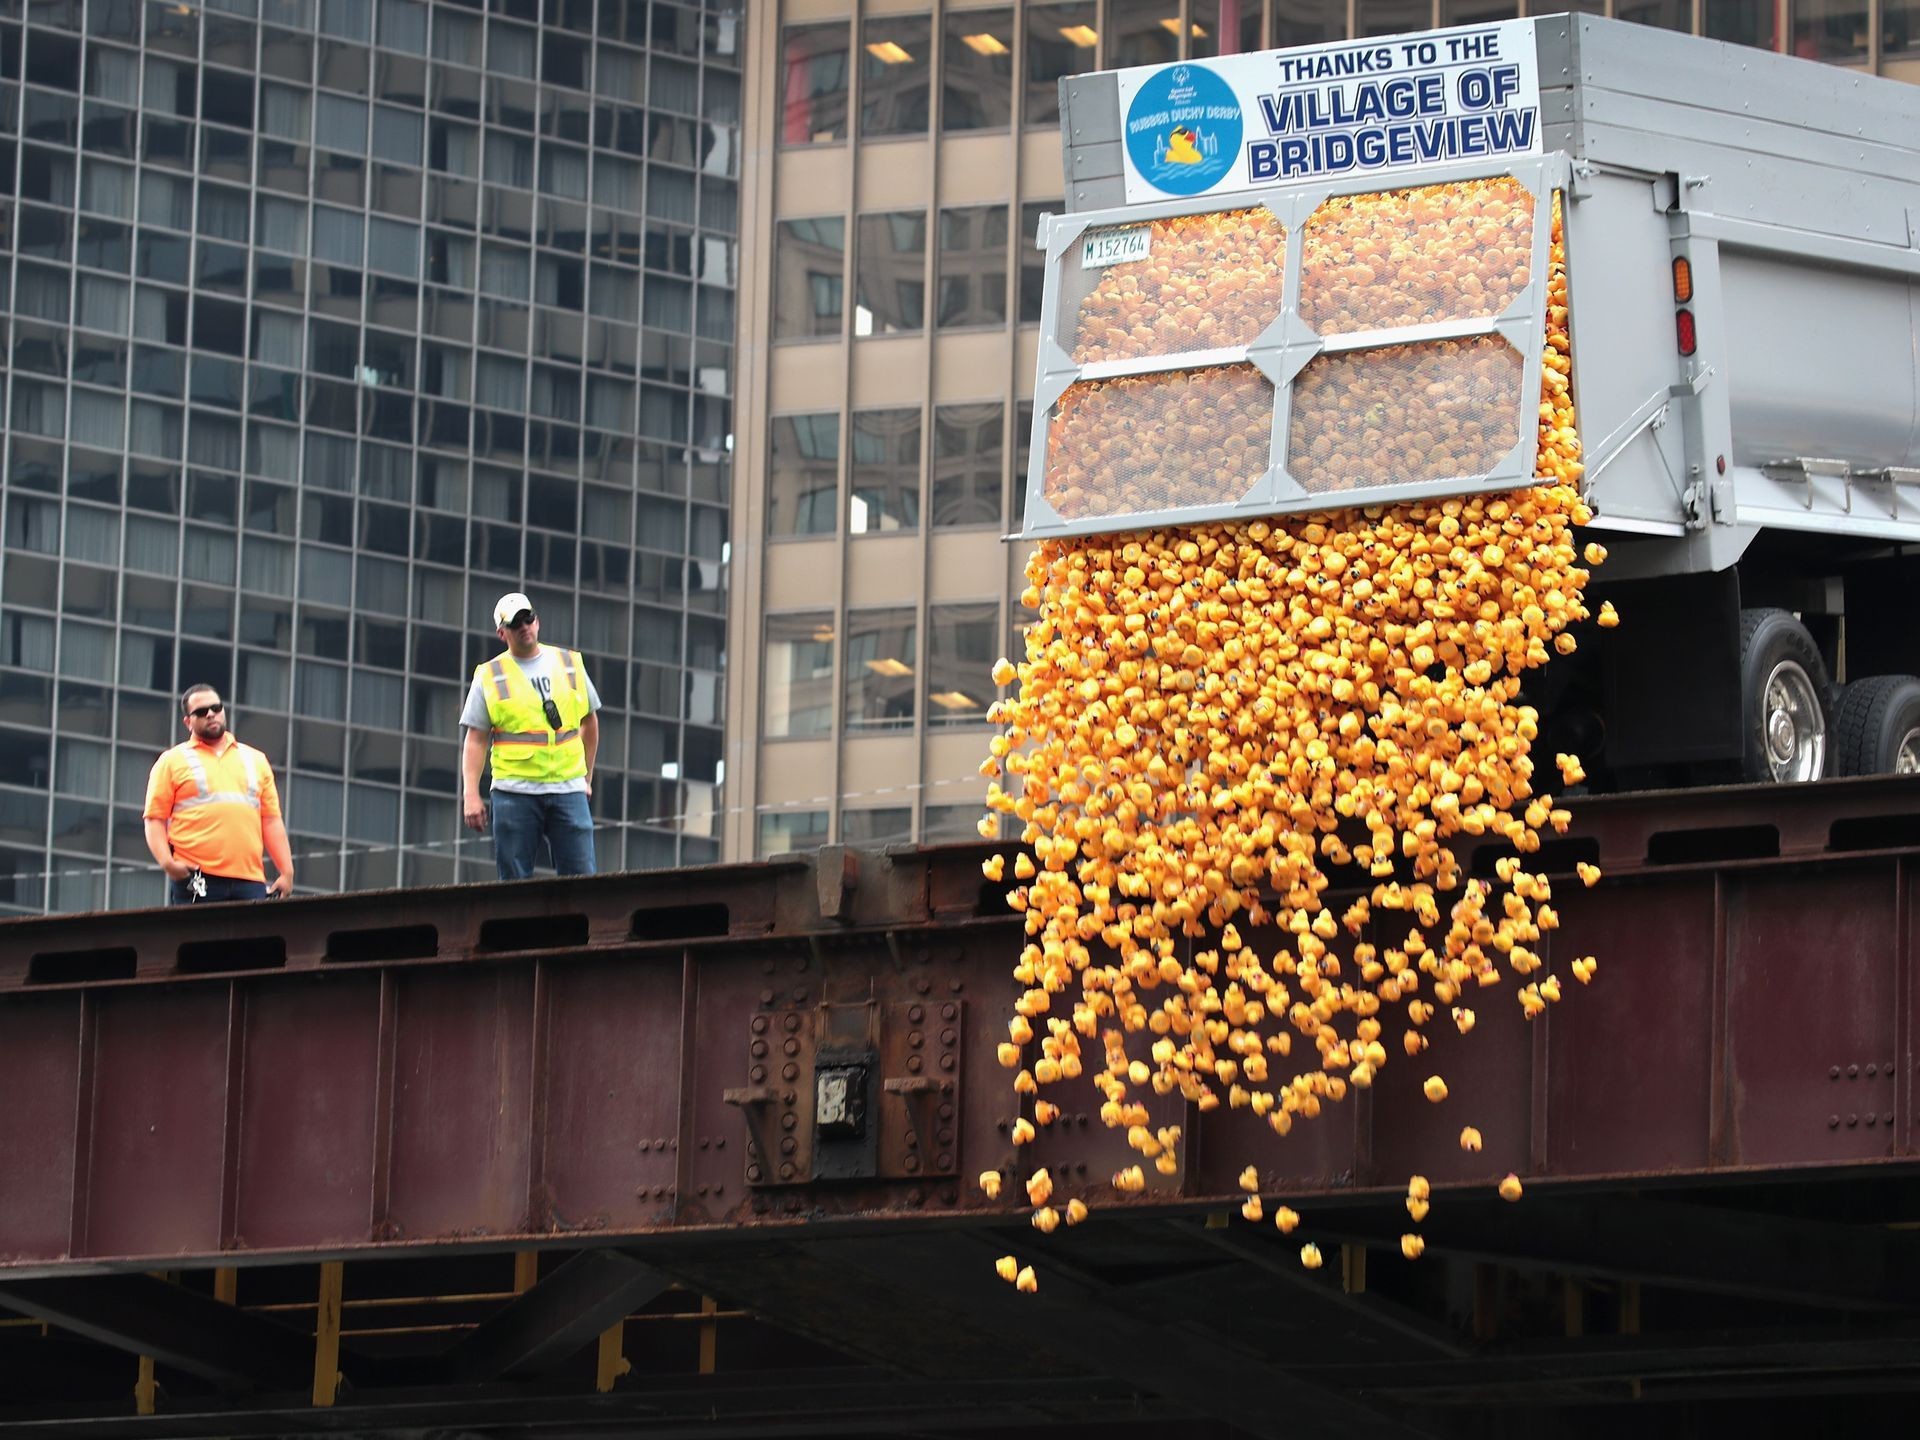 1920x1440 Rubber ducks are dropped into the Chicago River to